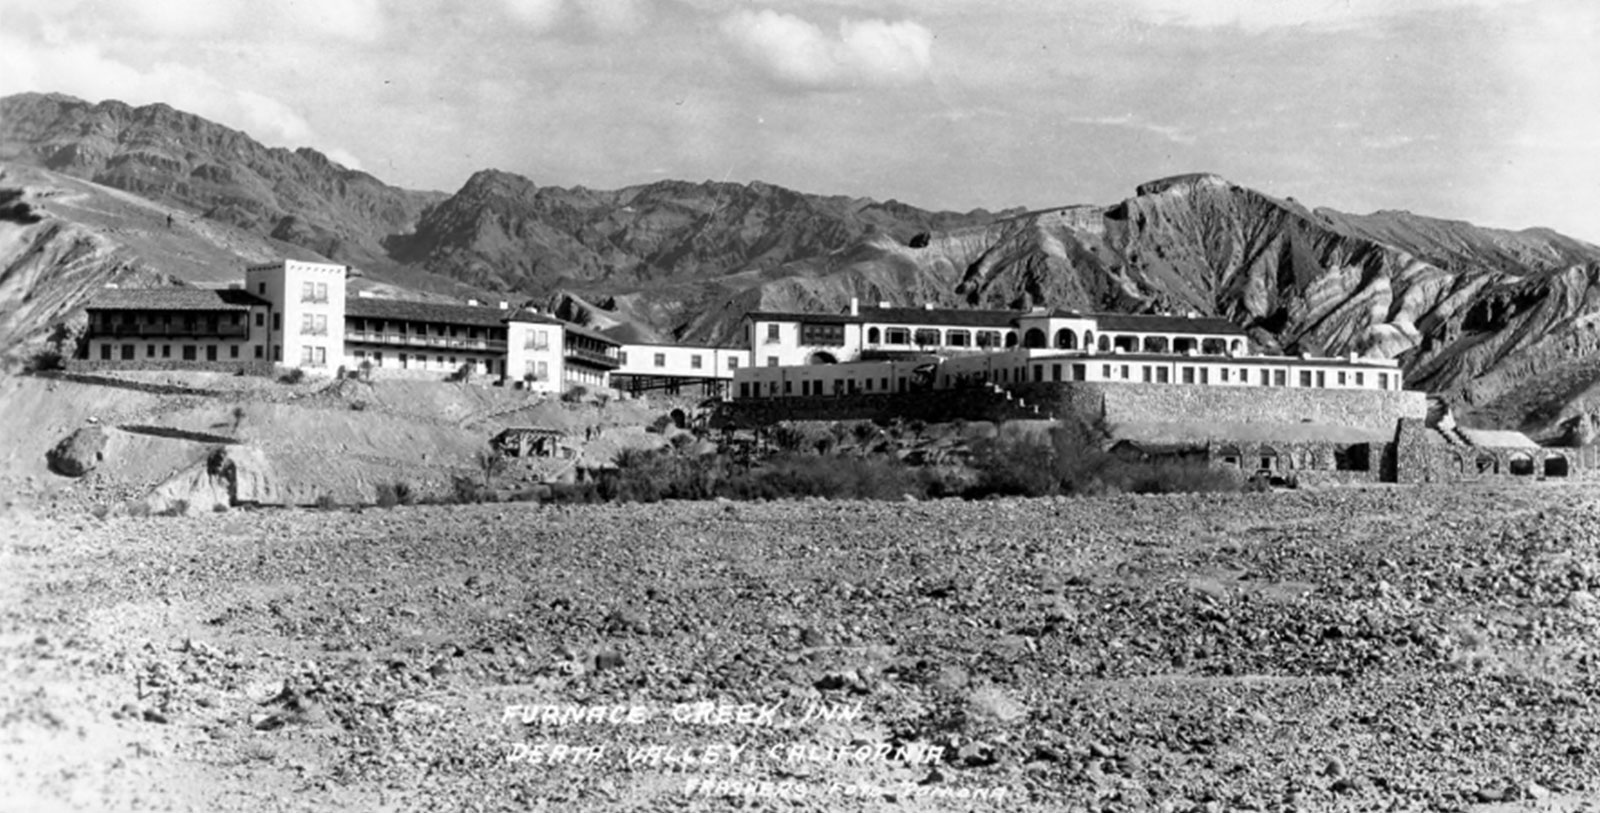 Image of Historic Hotel Exterior with Fountain The Inn at Death Valley, 1927, Member of Historic Hotels of America, in Death Valley, California, History